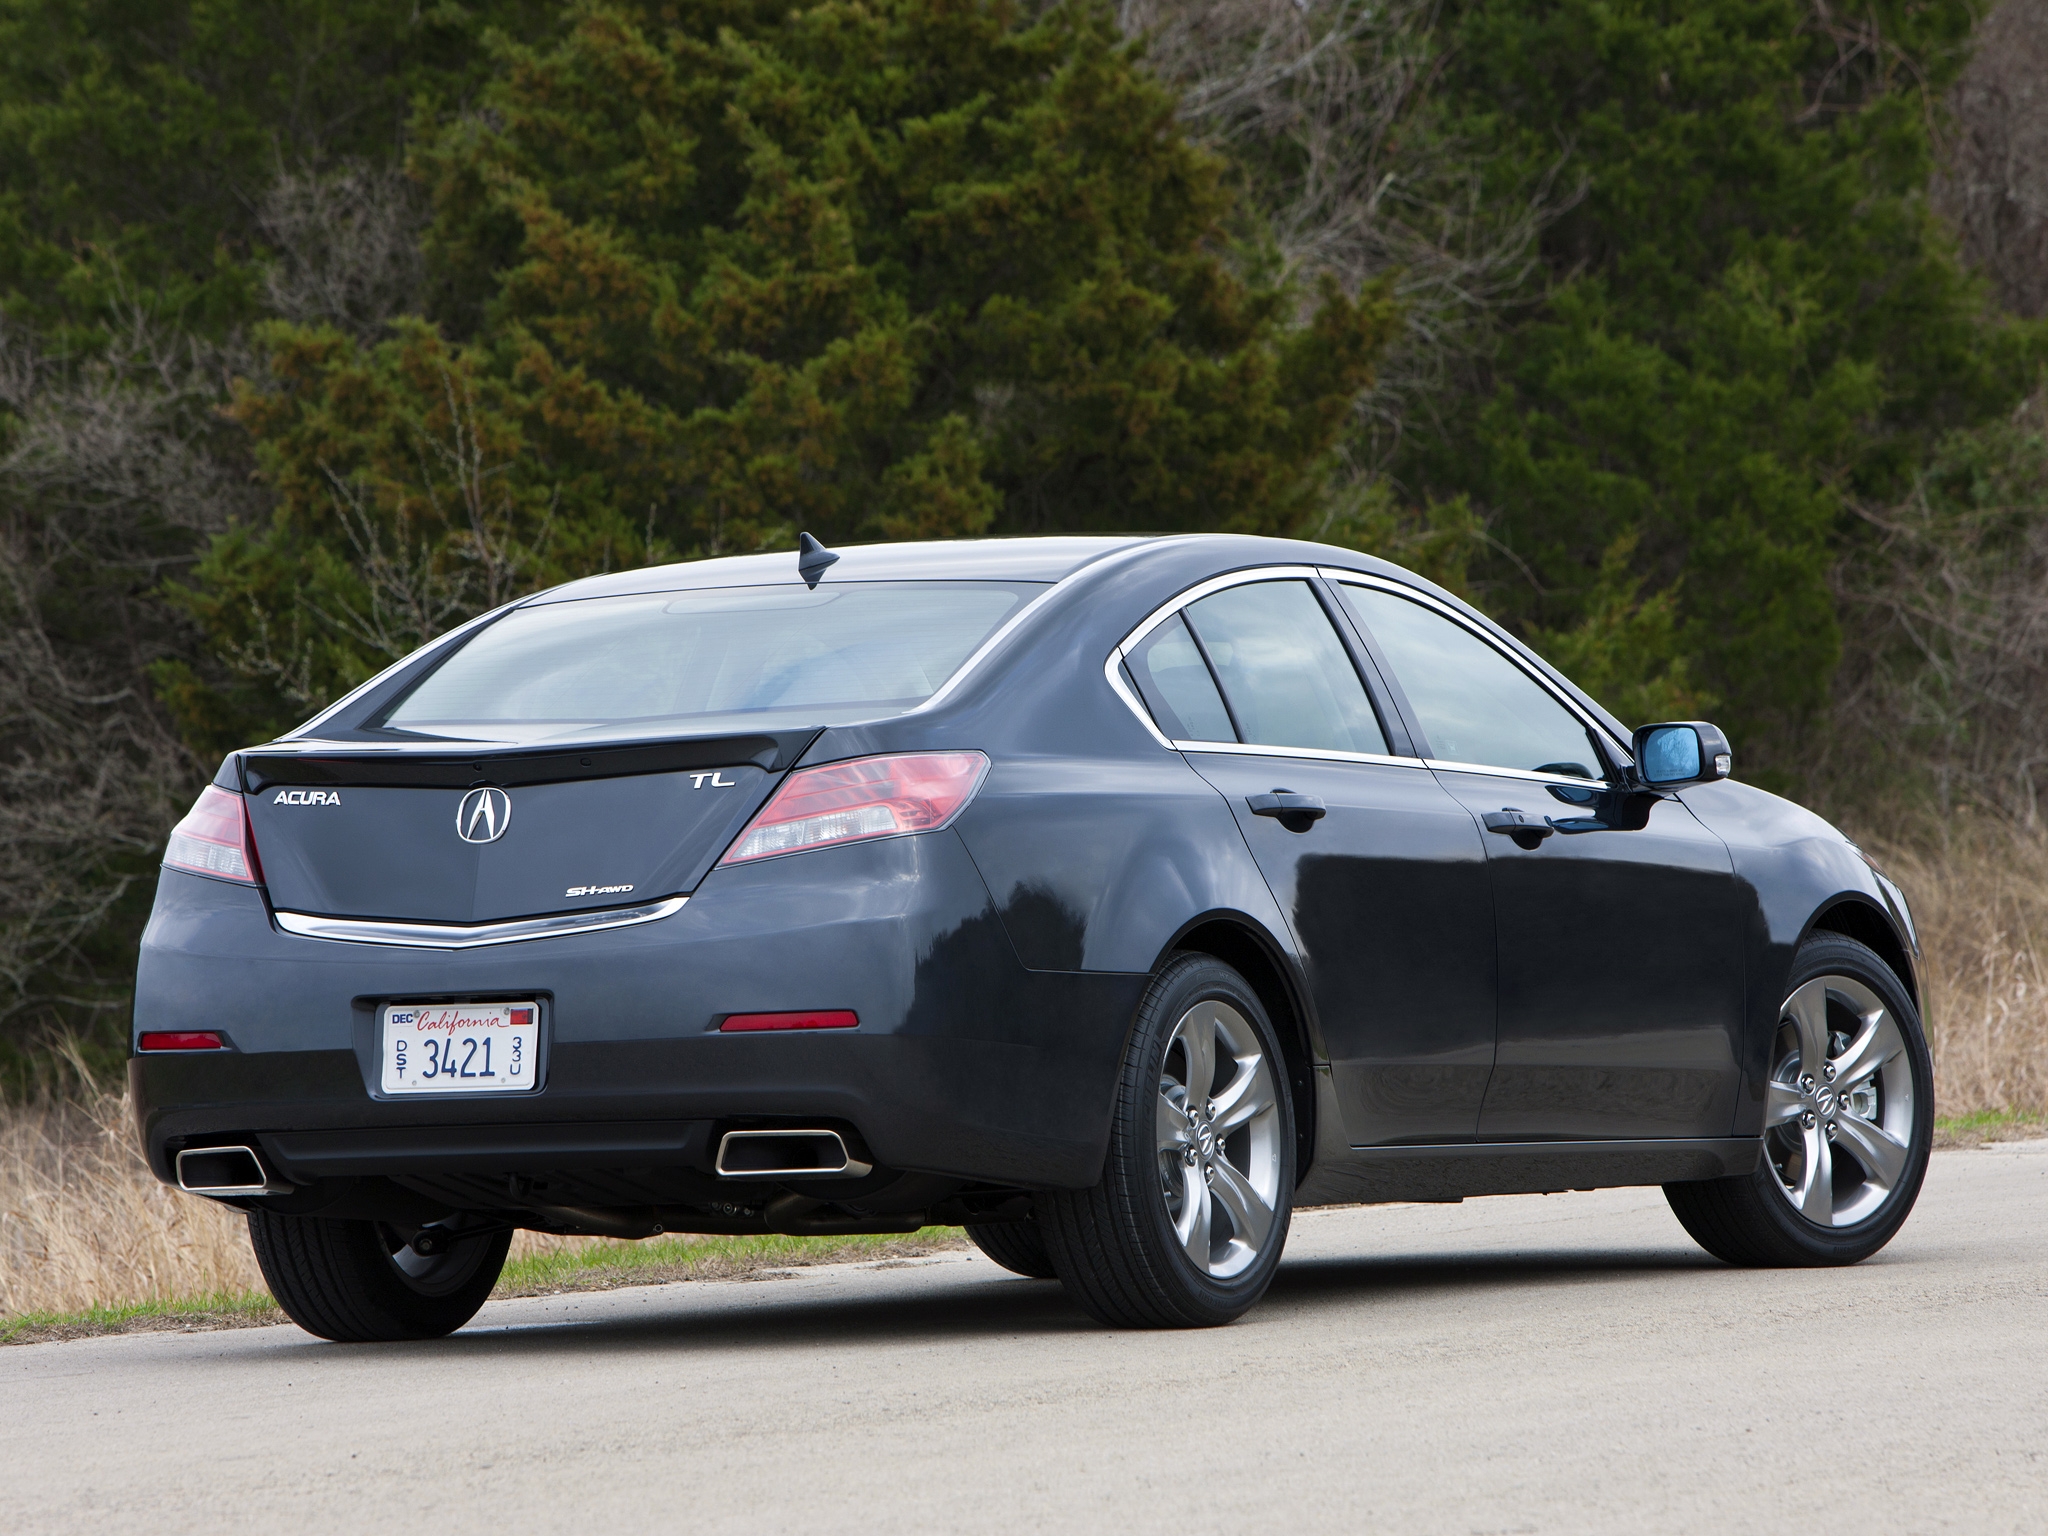 Full HD auto, nature, trees, acura, cars, blue, back view, rear view, style, akura, tl, 2011